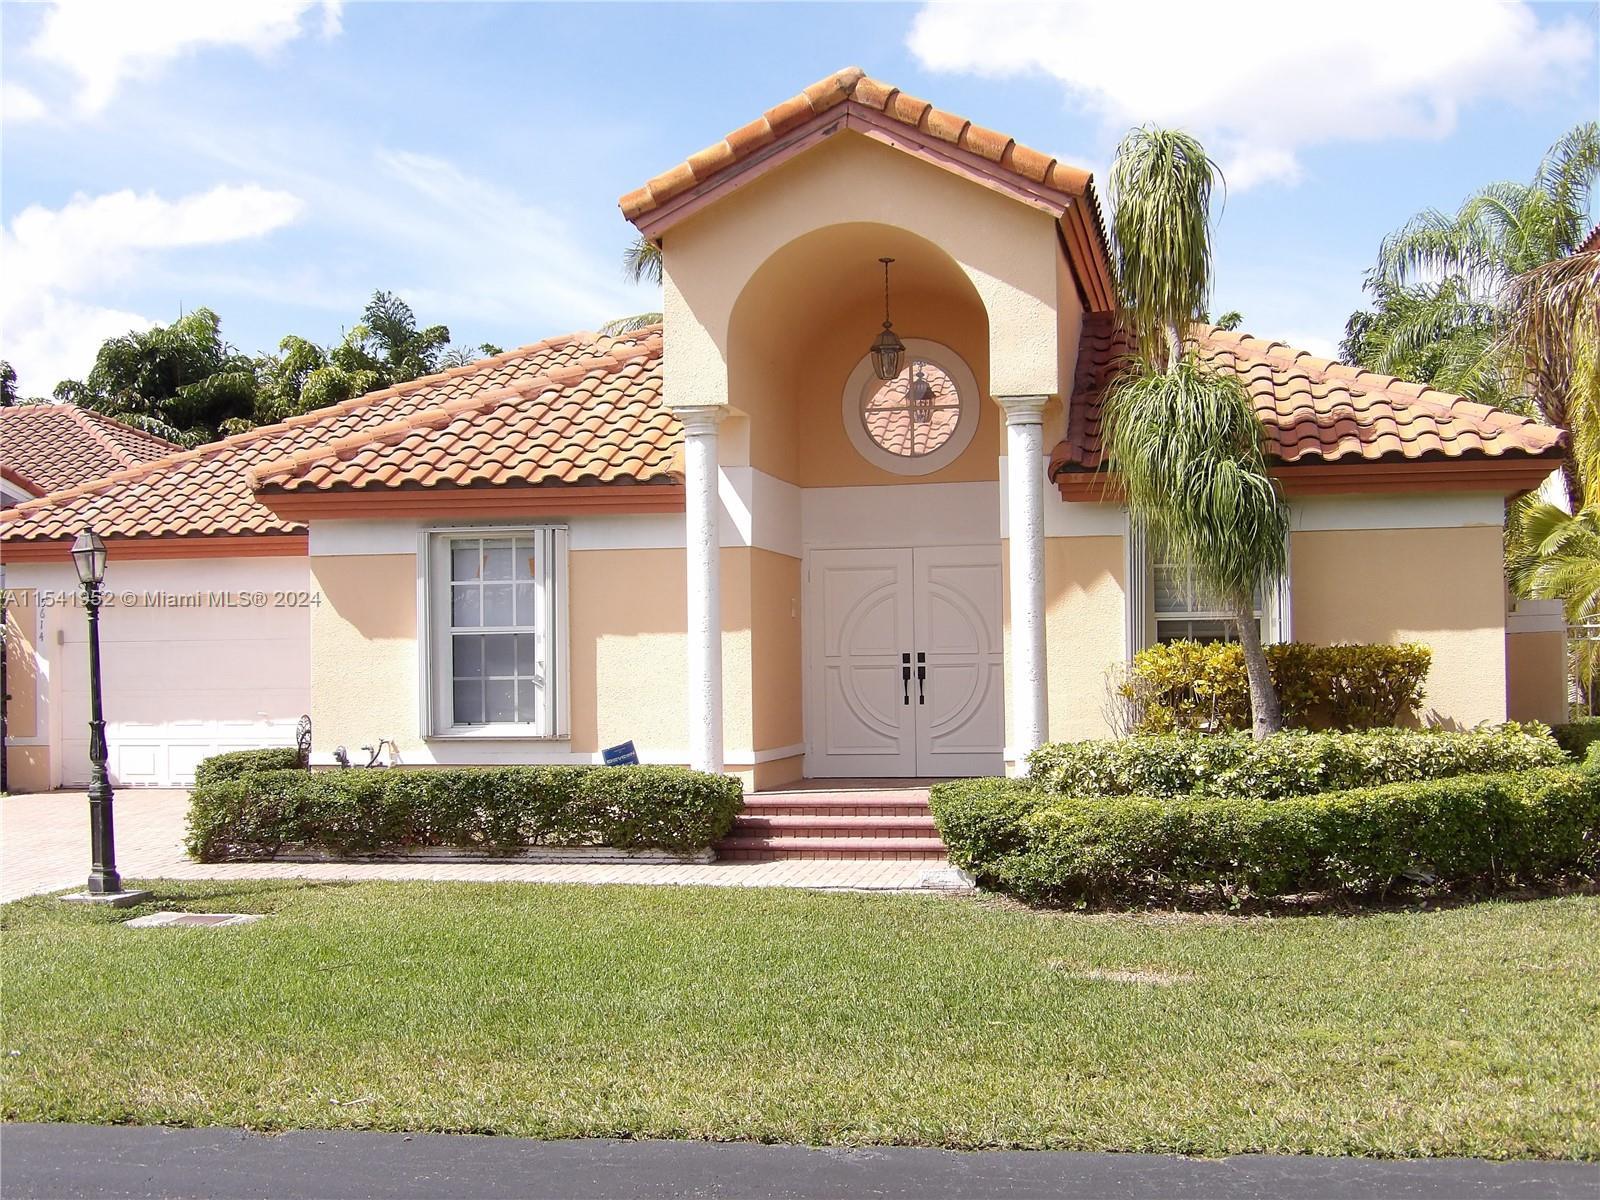 Photo of 5614 NW 104th Ct in Doral, FL